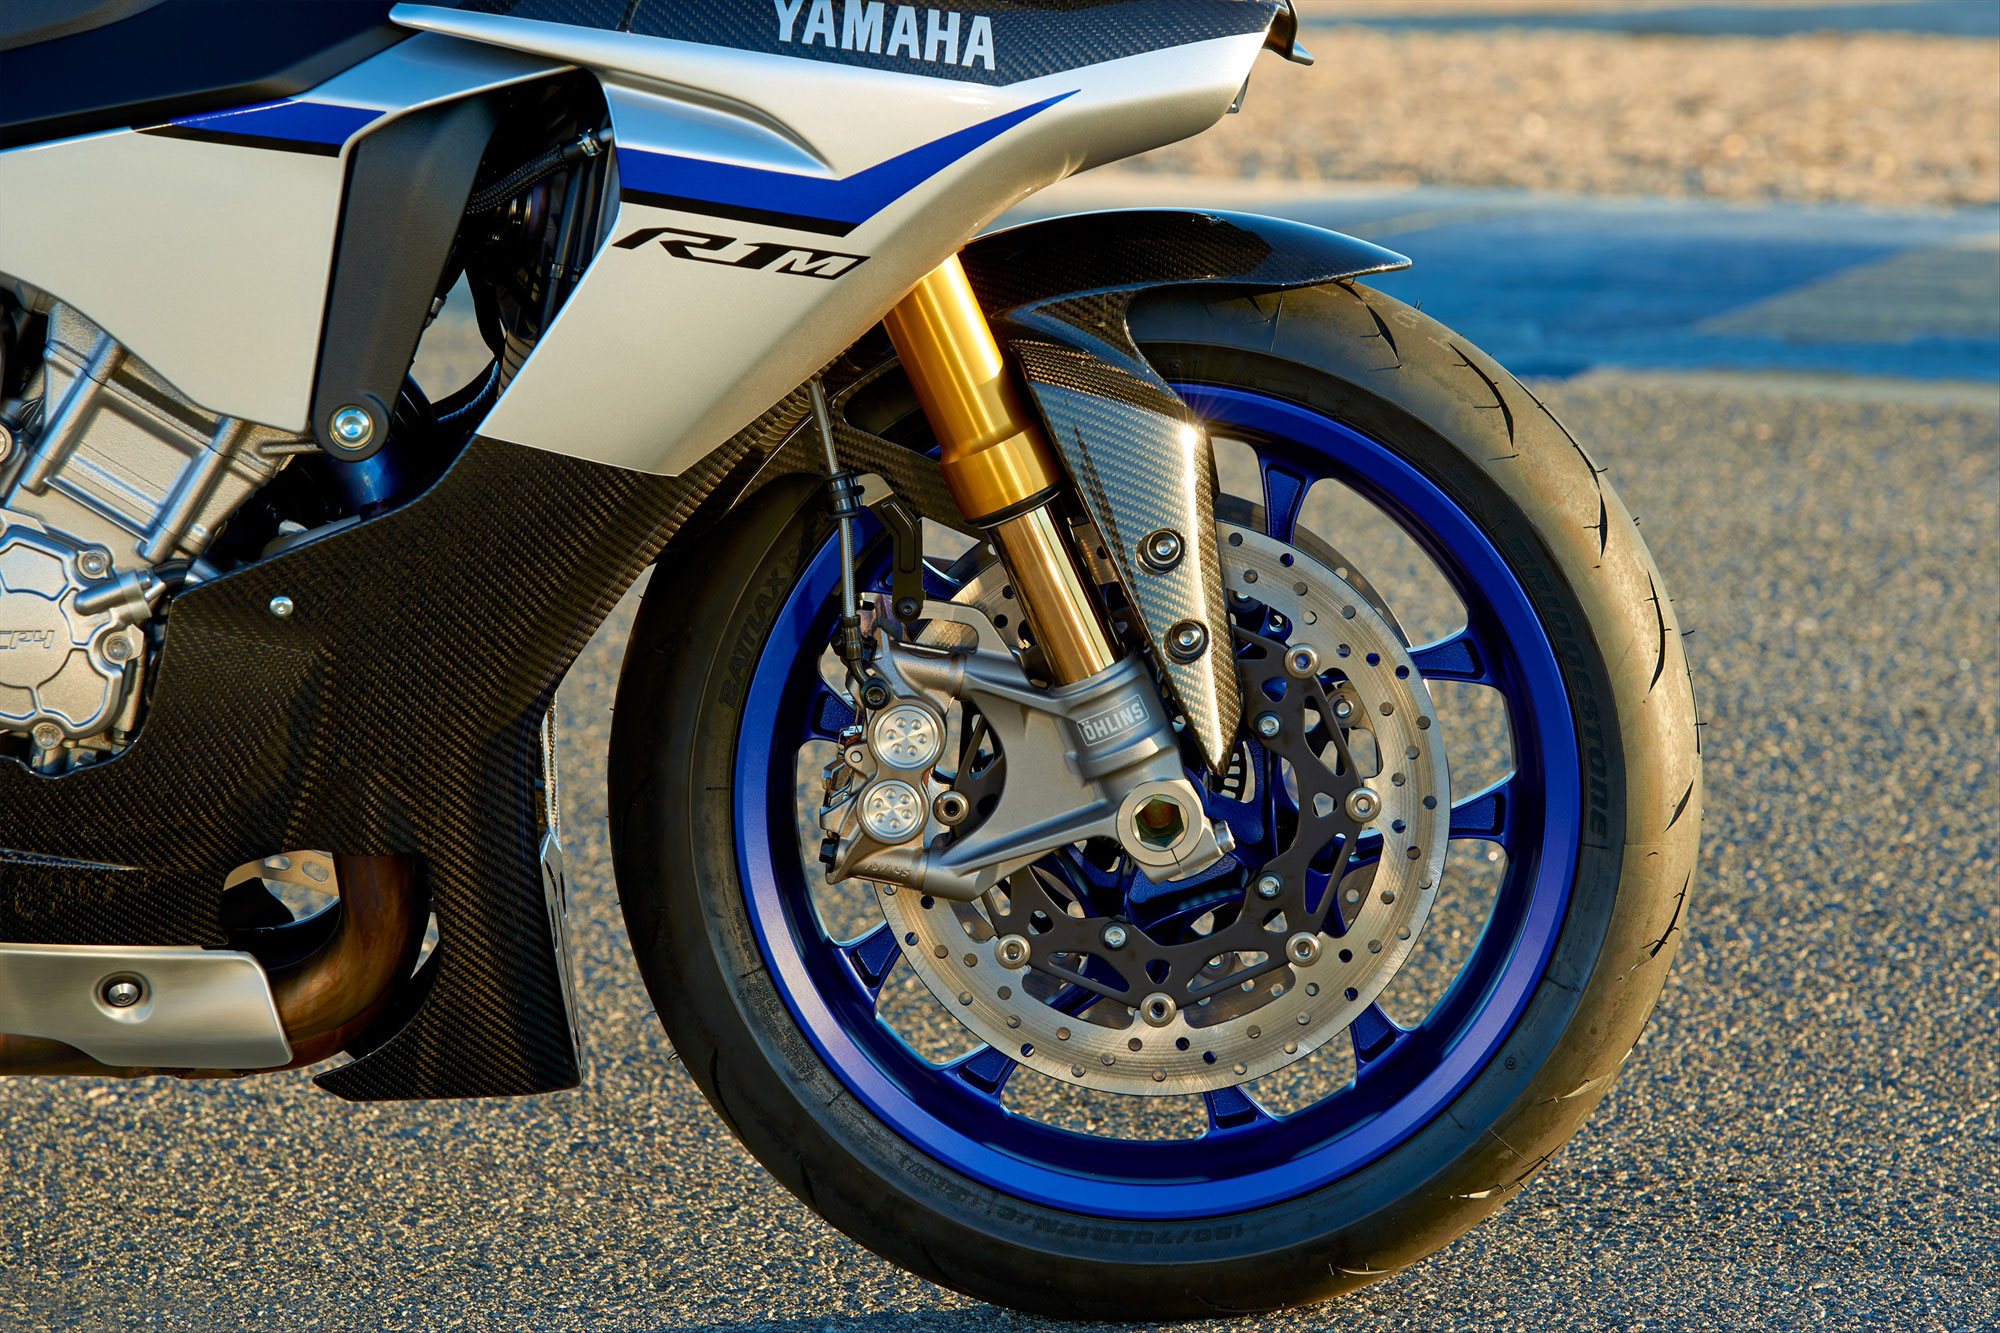 Yamaha YZF R1M 2015 Front Wheel View